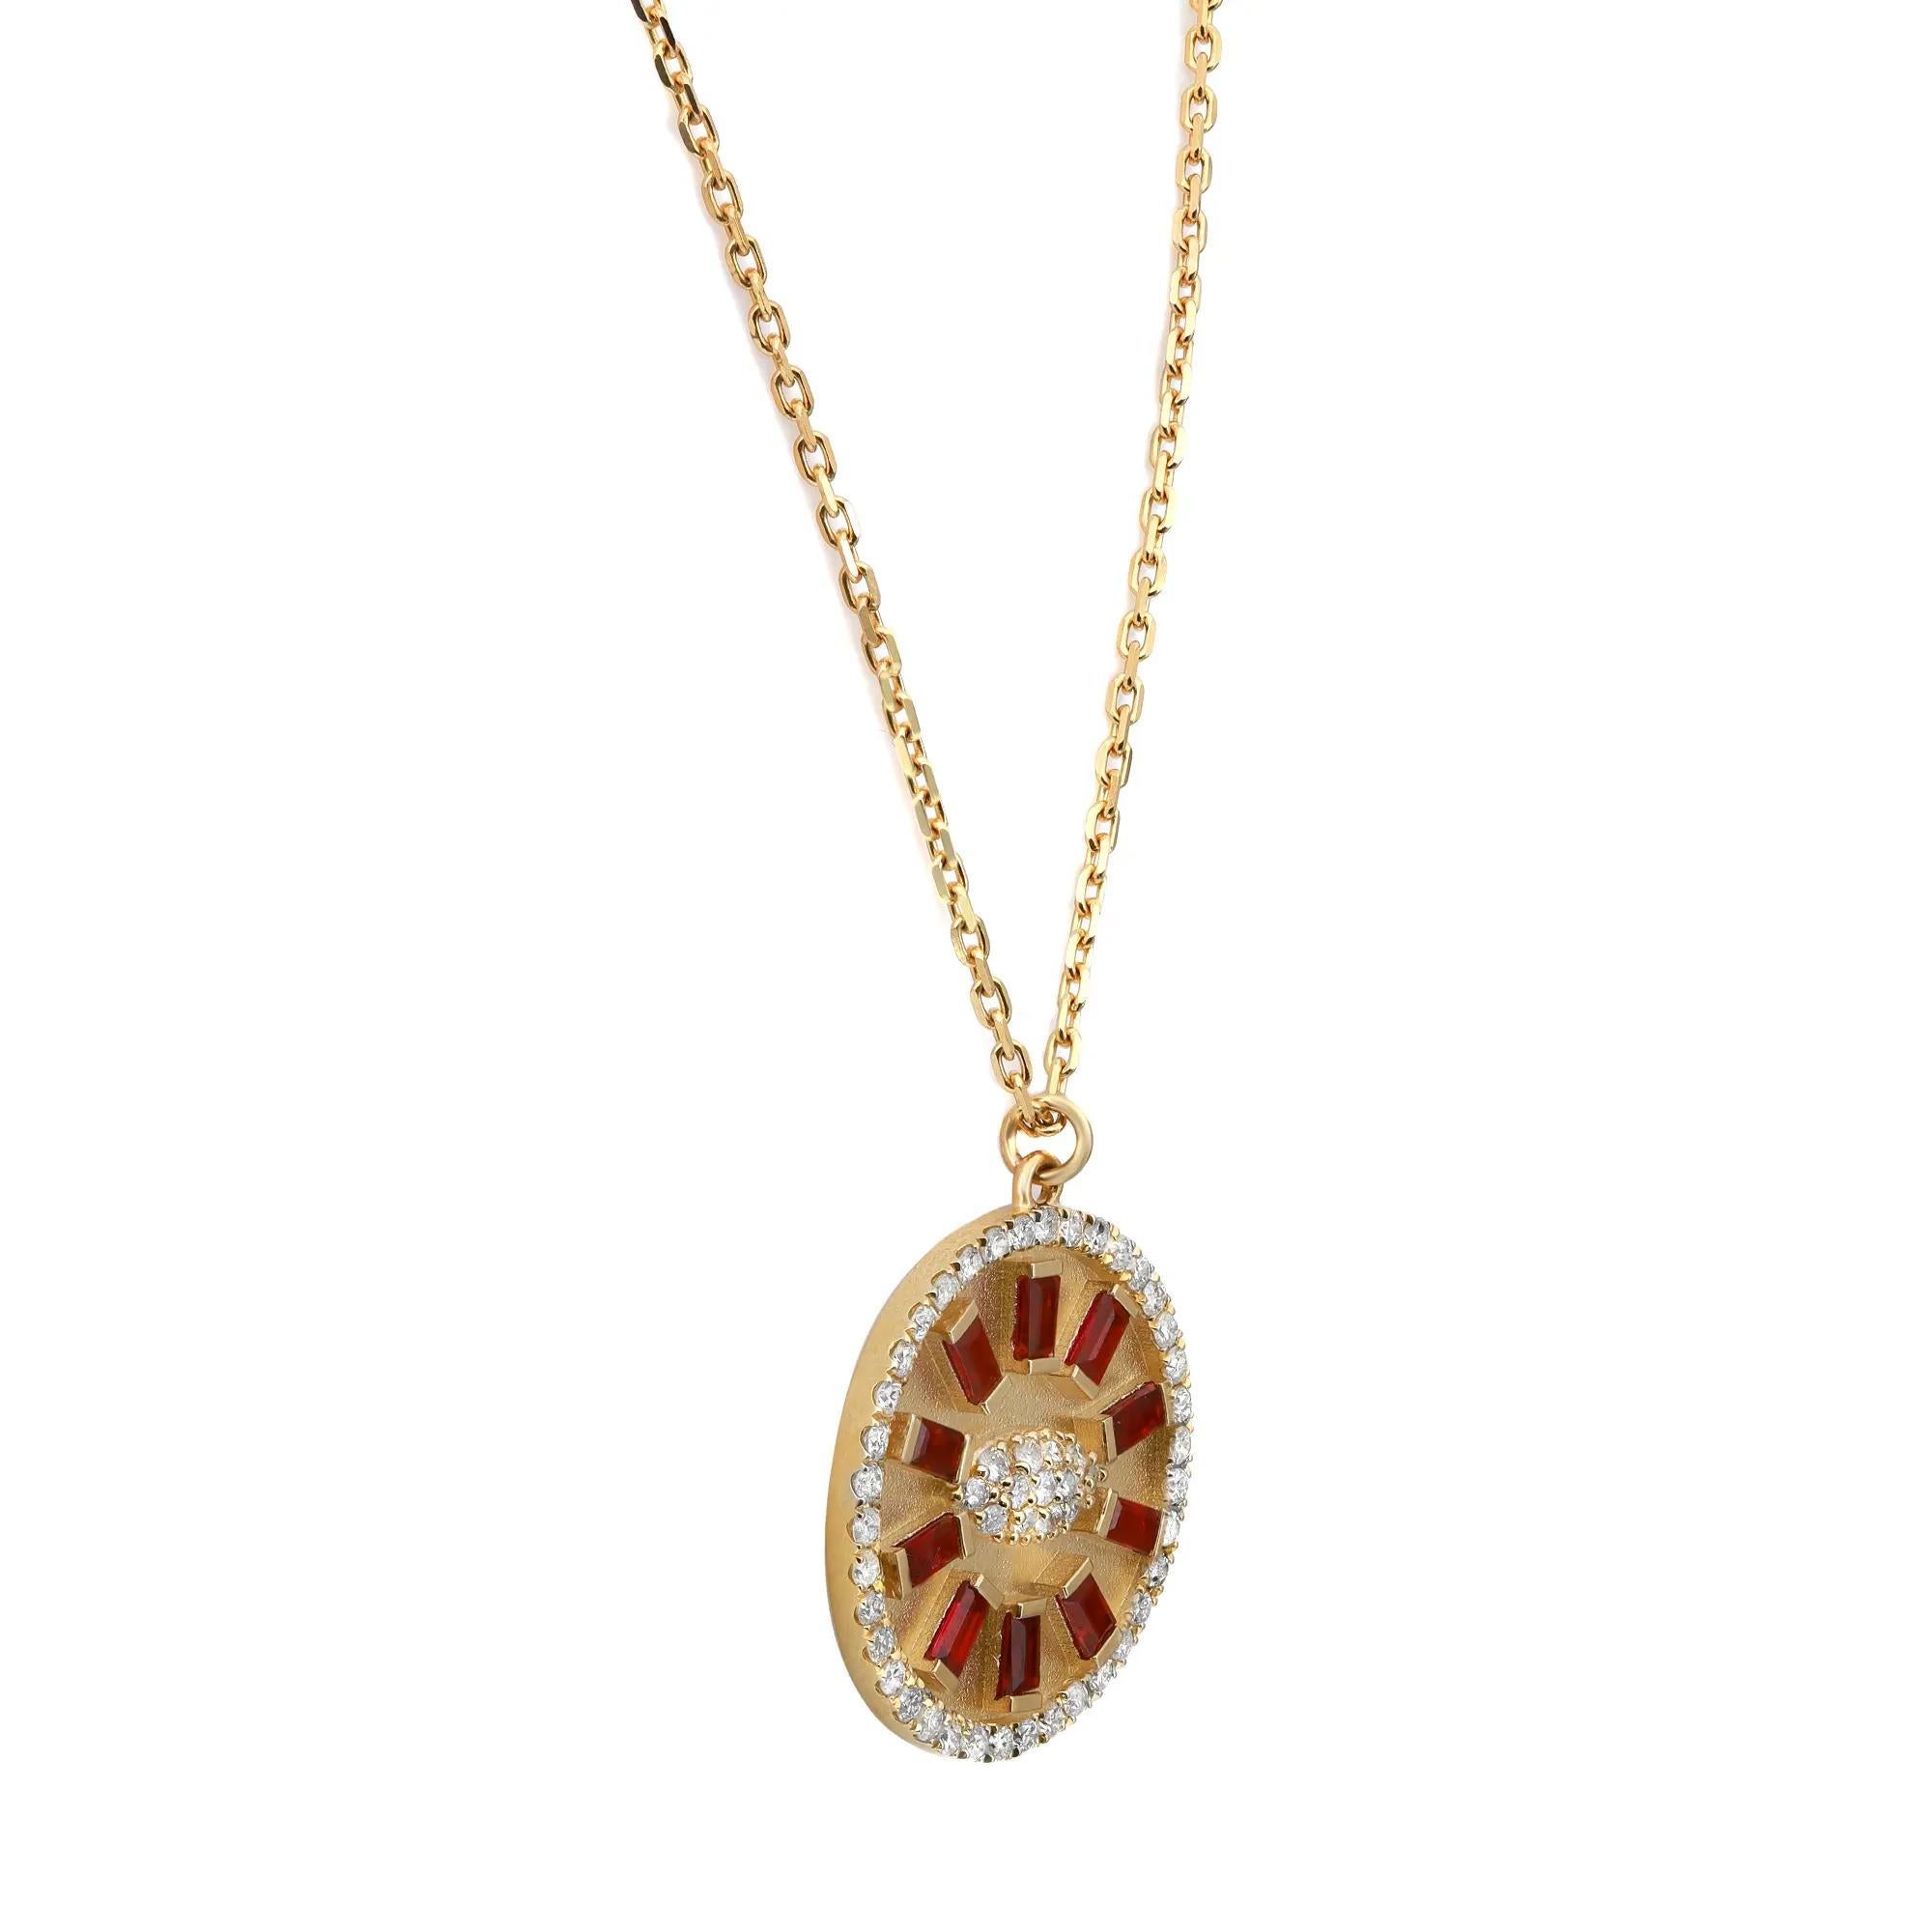 Fabulous and chic, this dazzling diamond and ruby pendant necklace is a standout addition to your everyday and evening looks. This piece gives a touch of elegance to any ensemble you pair it with. Features 10 half bezel set baguette cut rubies